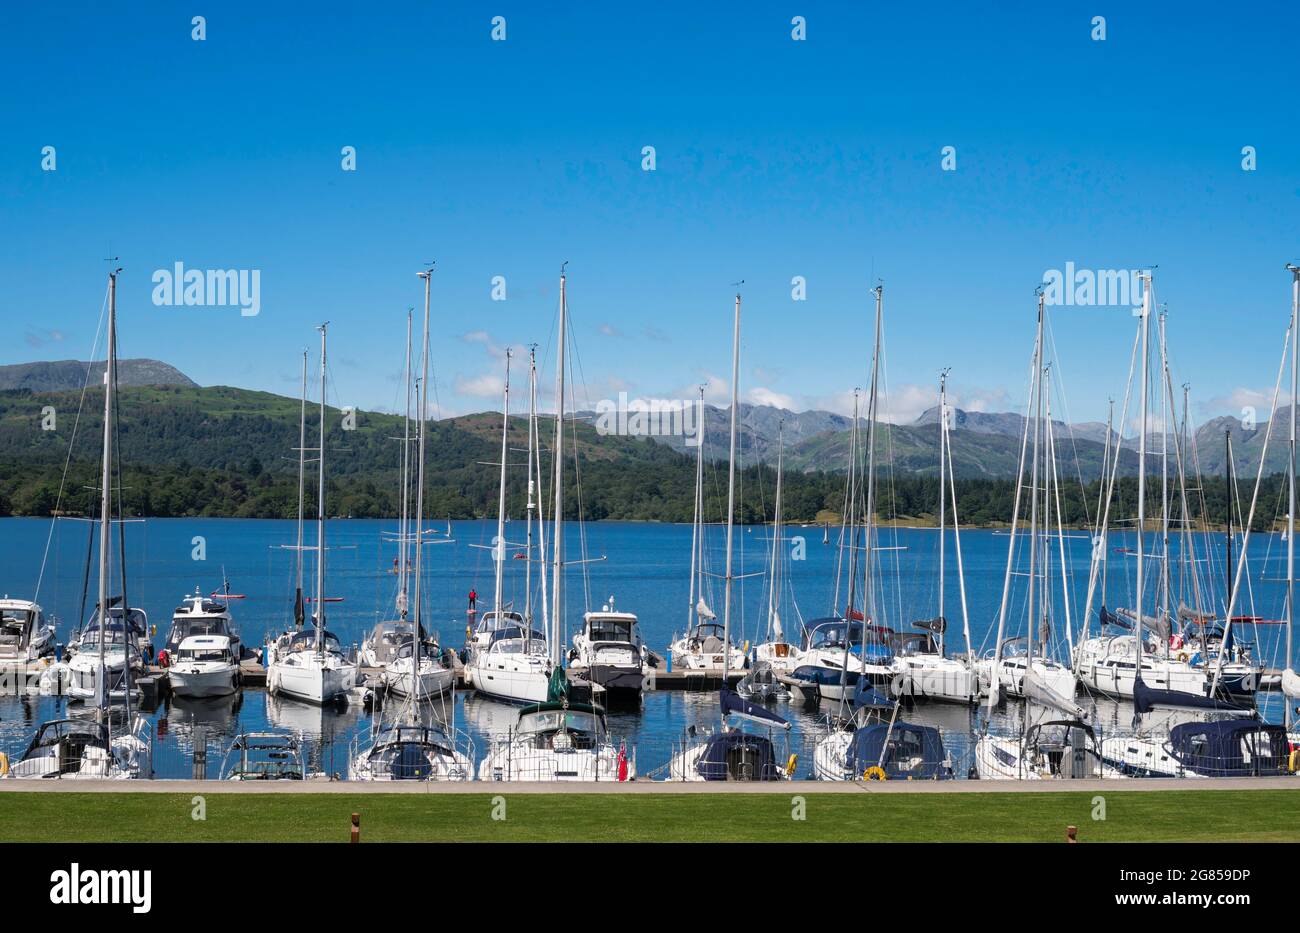 View from the 599 Lakesider open topped bus from Windermere to Grasmere at Low Wood Bay marina in Cumbria, England, UK Stock Photo